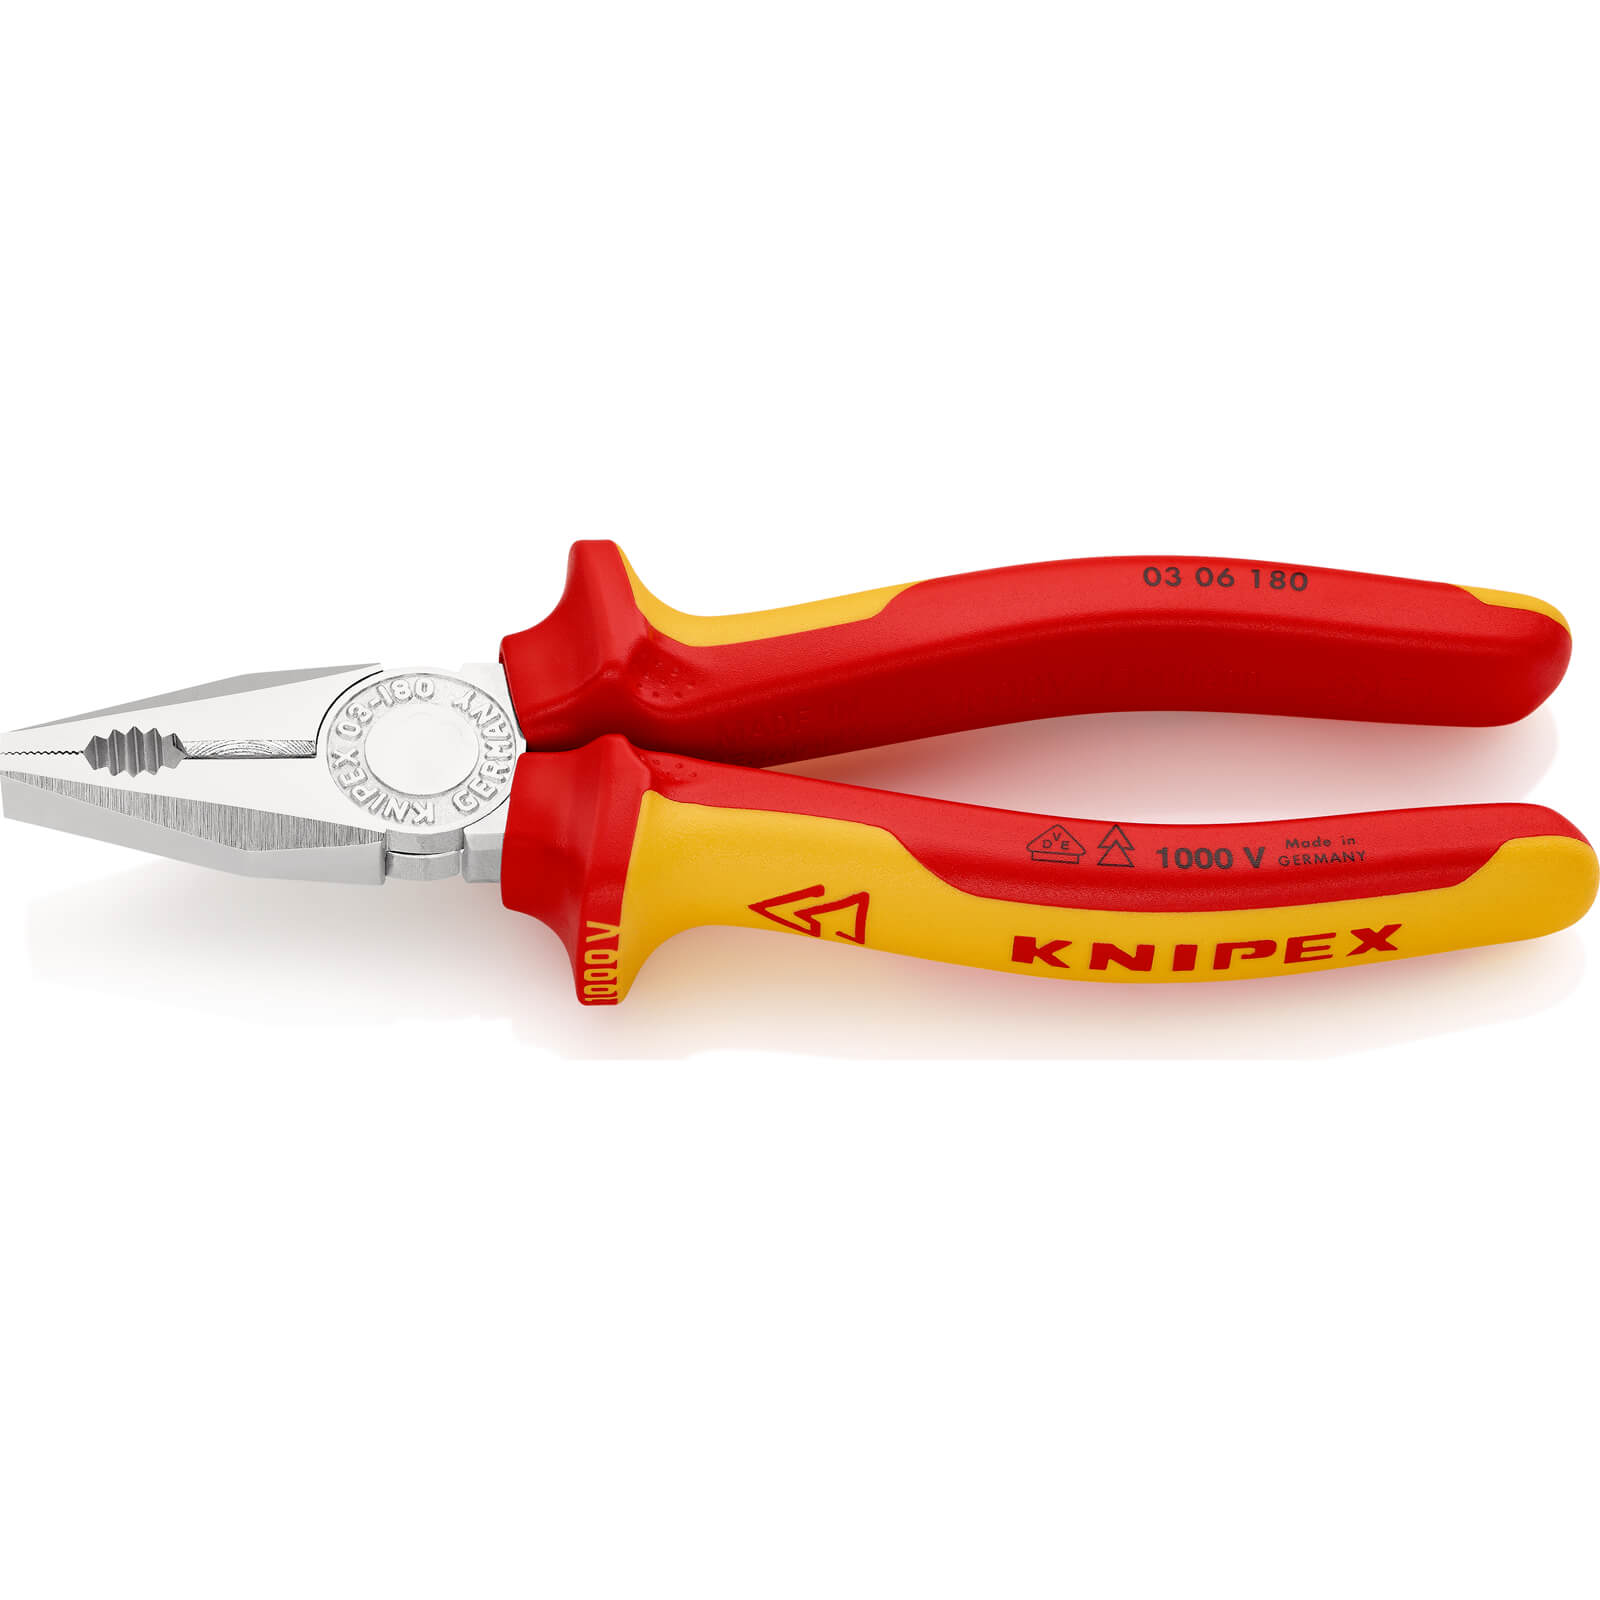 Image of Knipex 03 06 VDE Insulated Combination Pliers 180mm